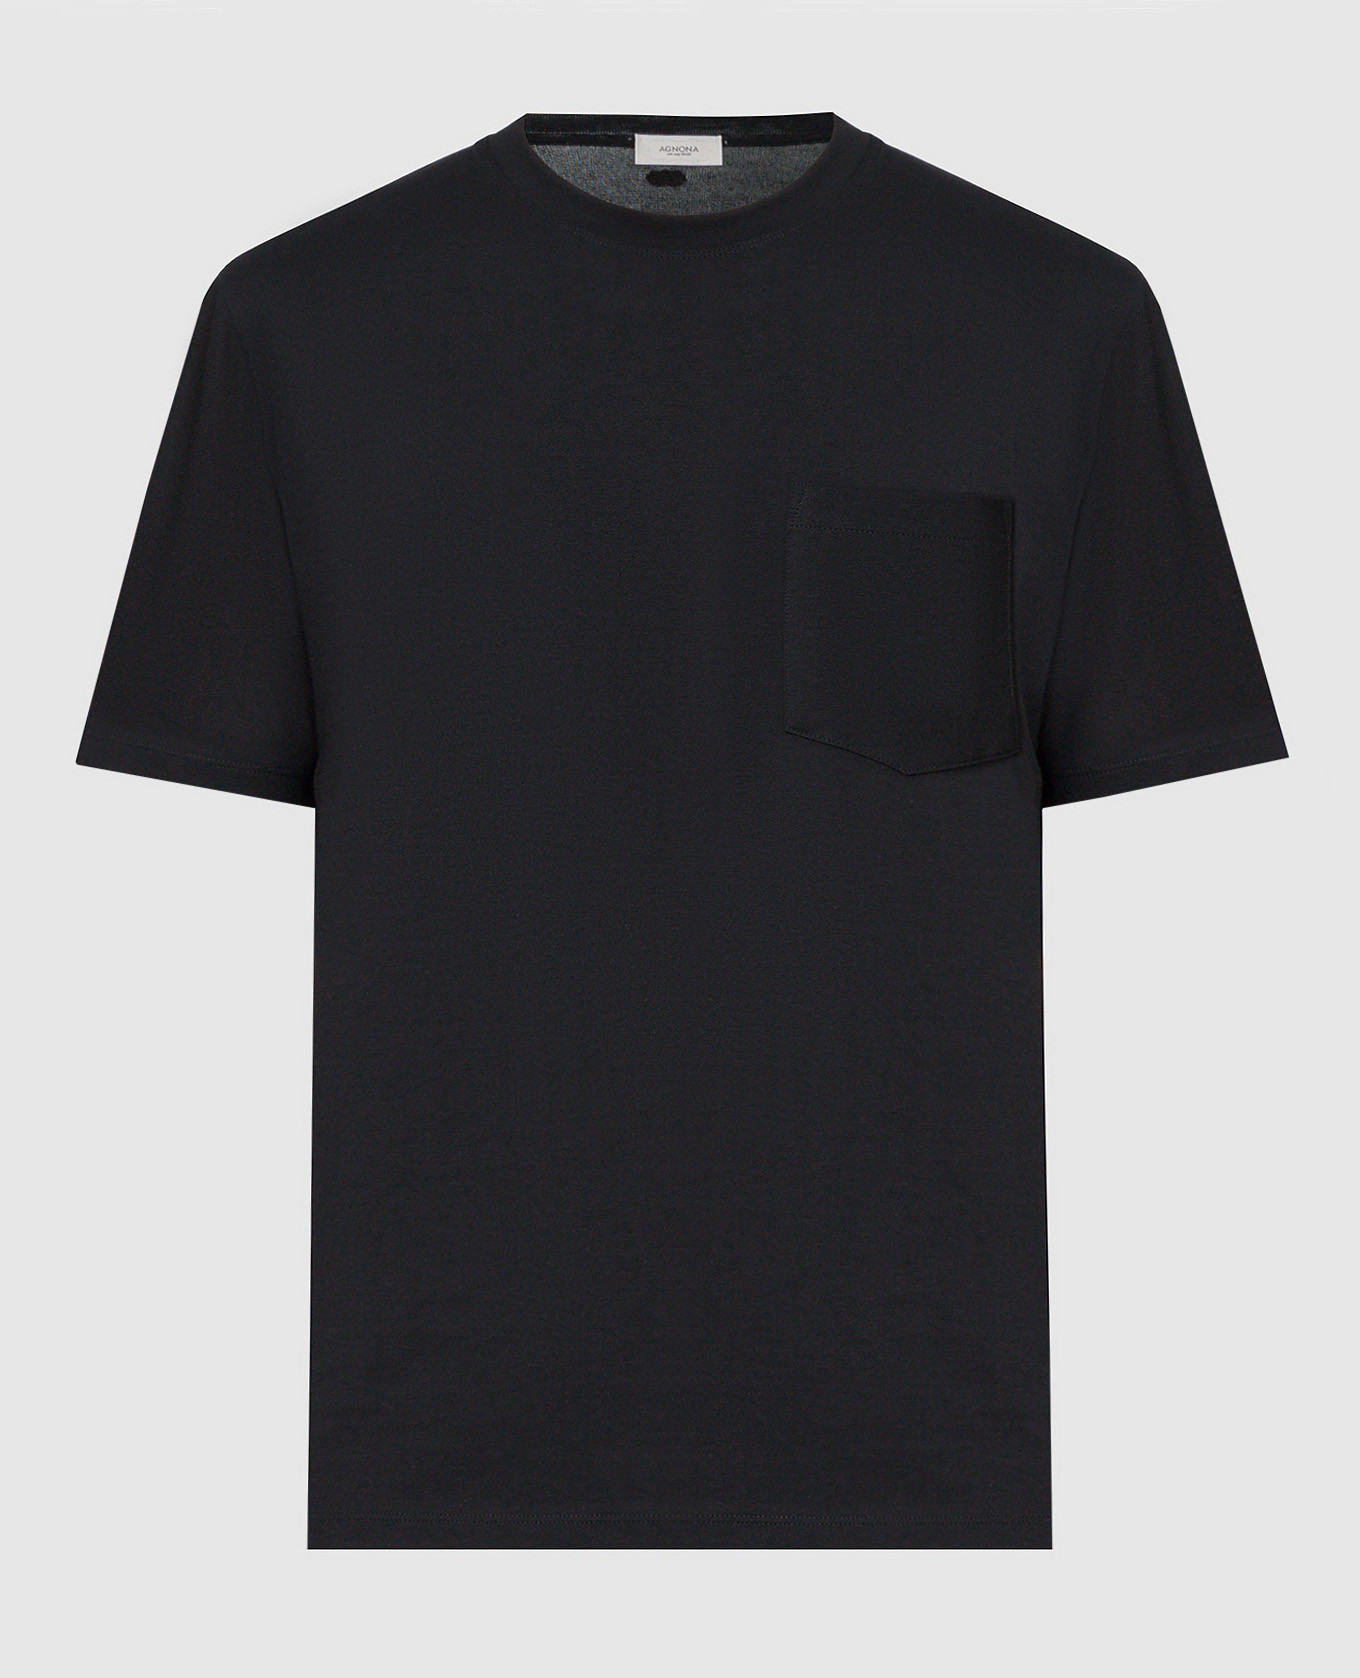 Black t-shirt with a pocket